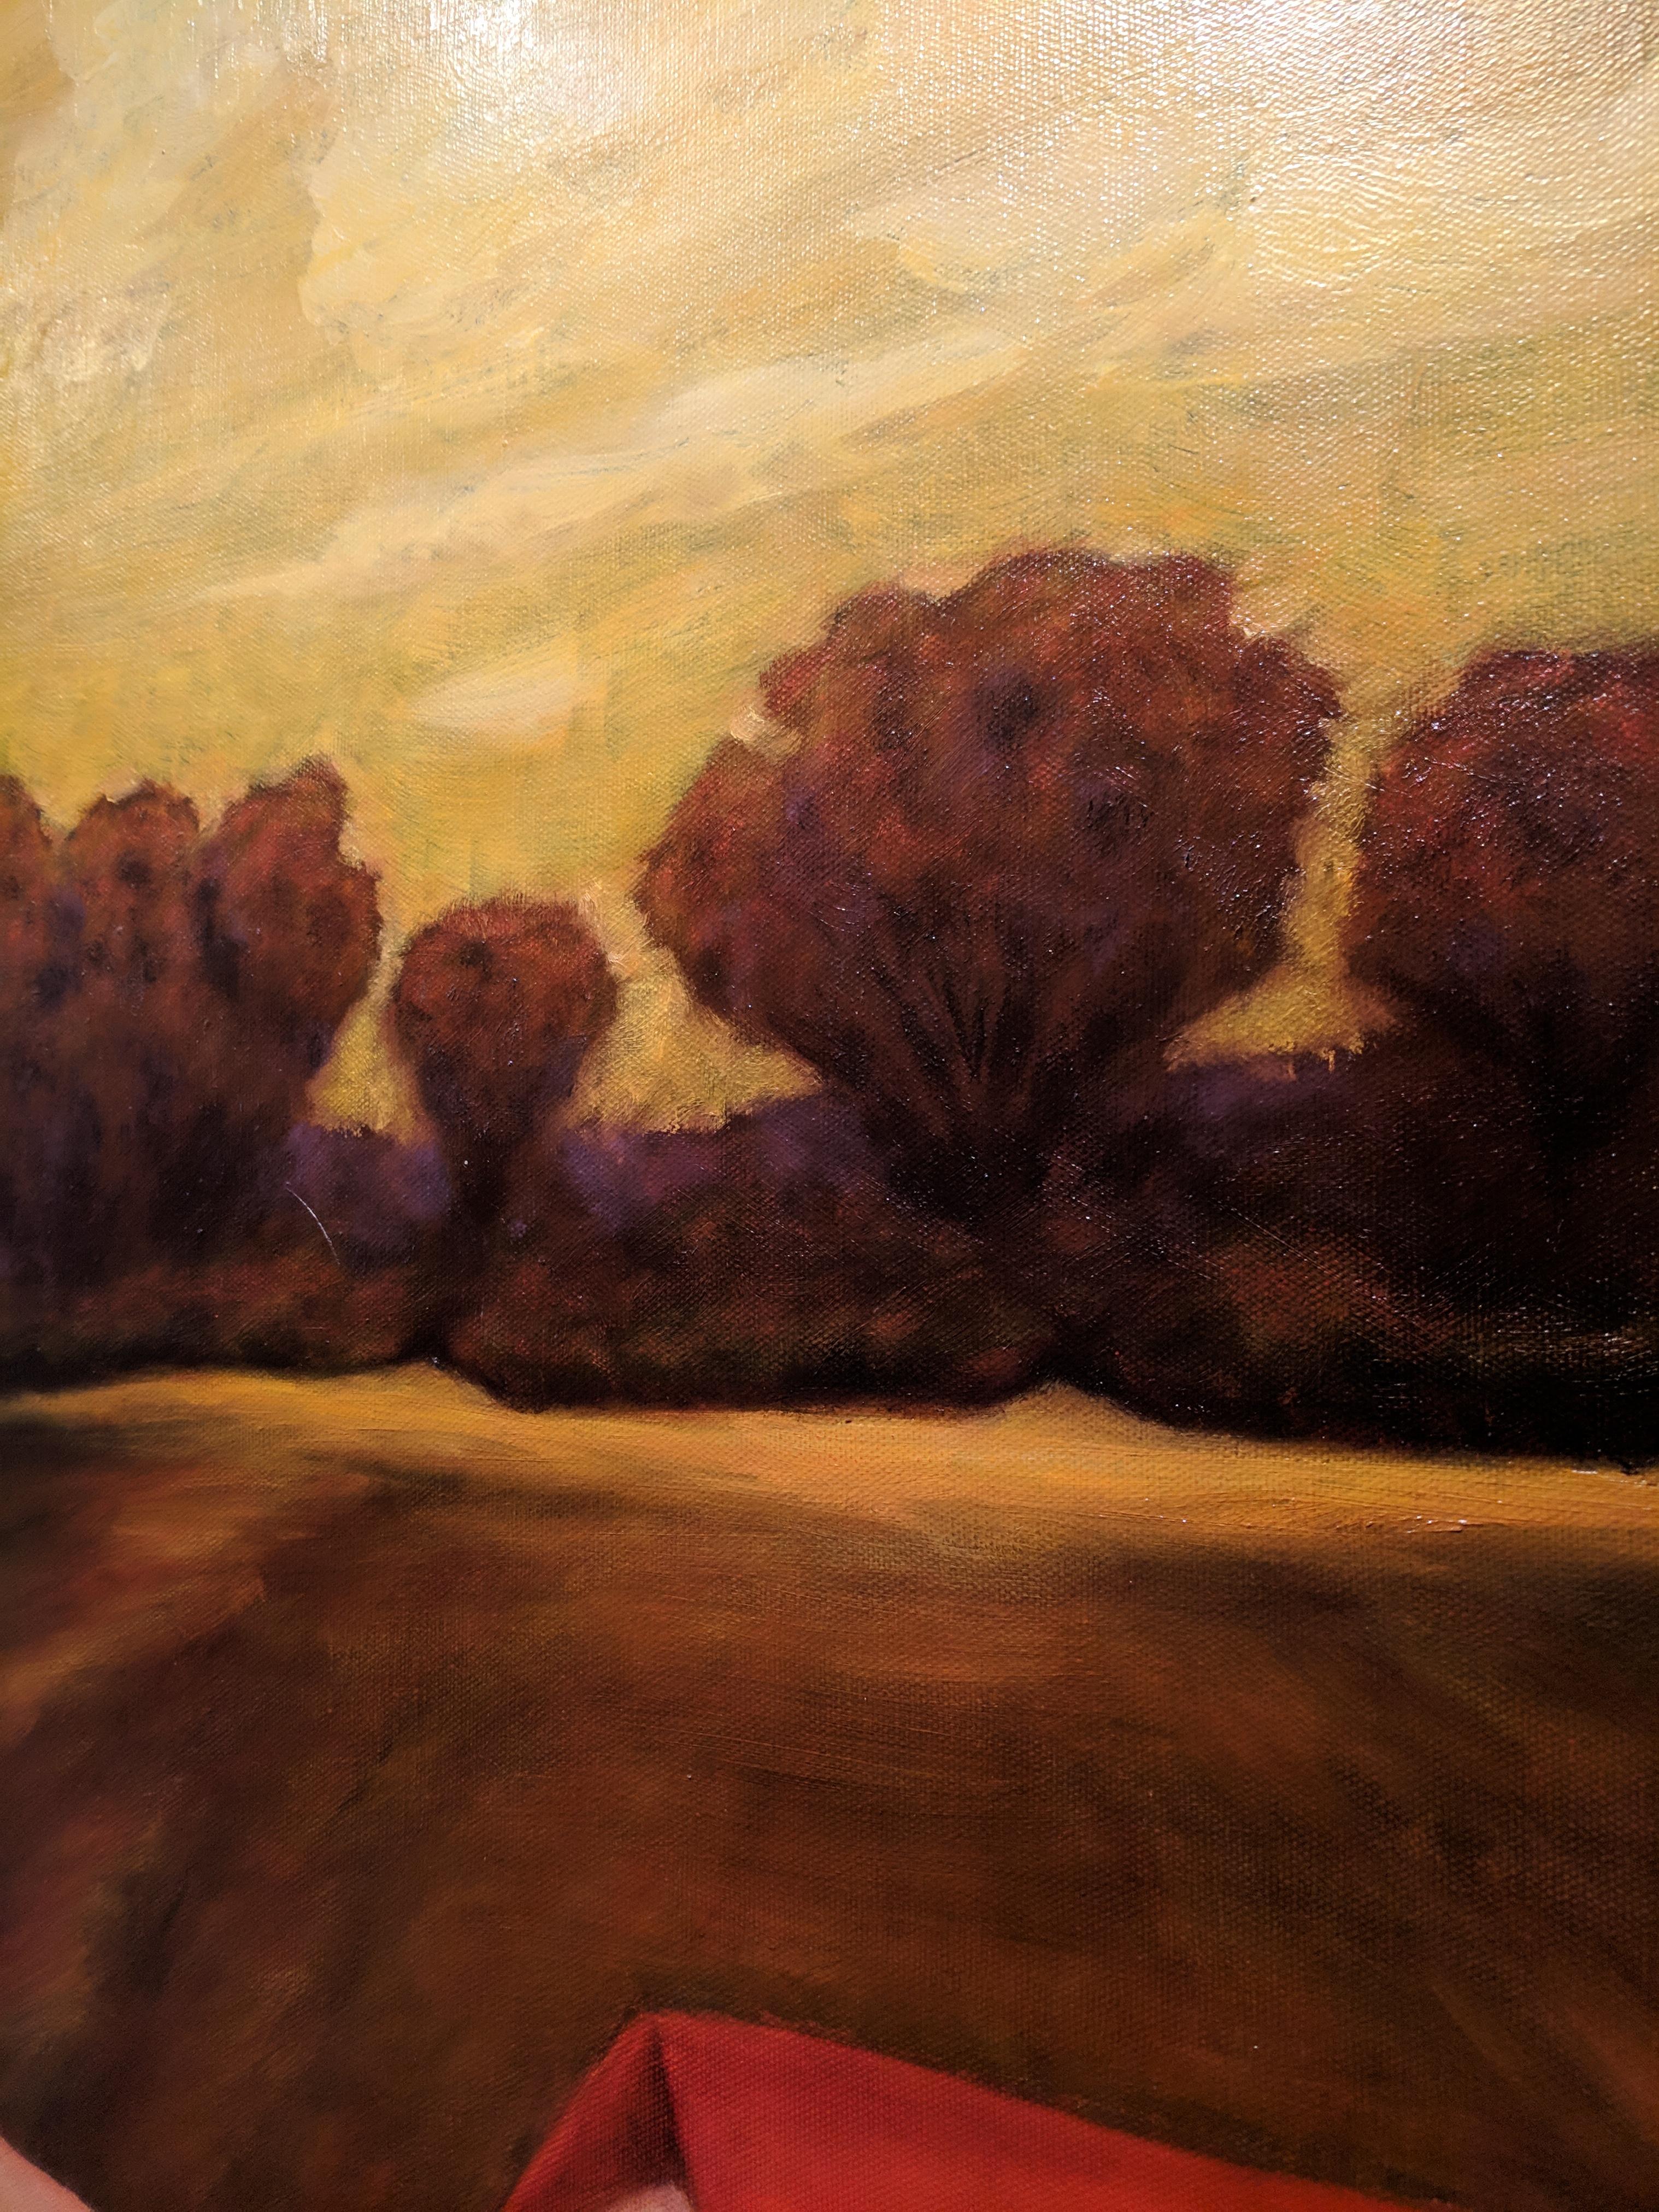 In this oil on canvas painting, beautifully framed, a torso is surrounded in fabric of a rich cadmium red. In the background is a field, where a tree line and sky are bathed in warm colors of ochre, olive green and cadmium yellow. There are notes of